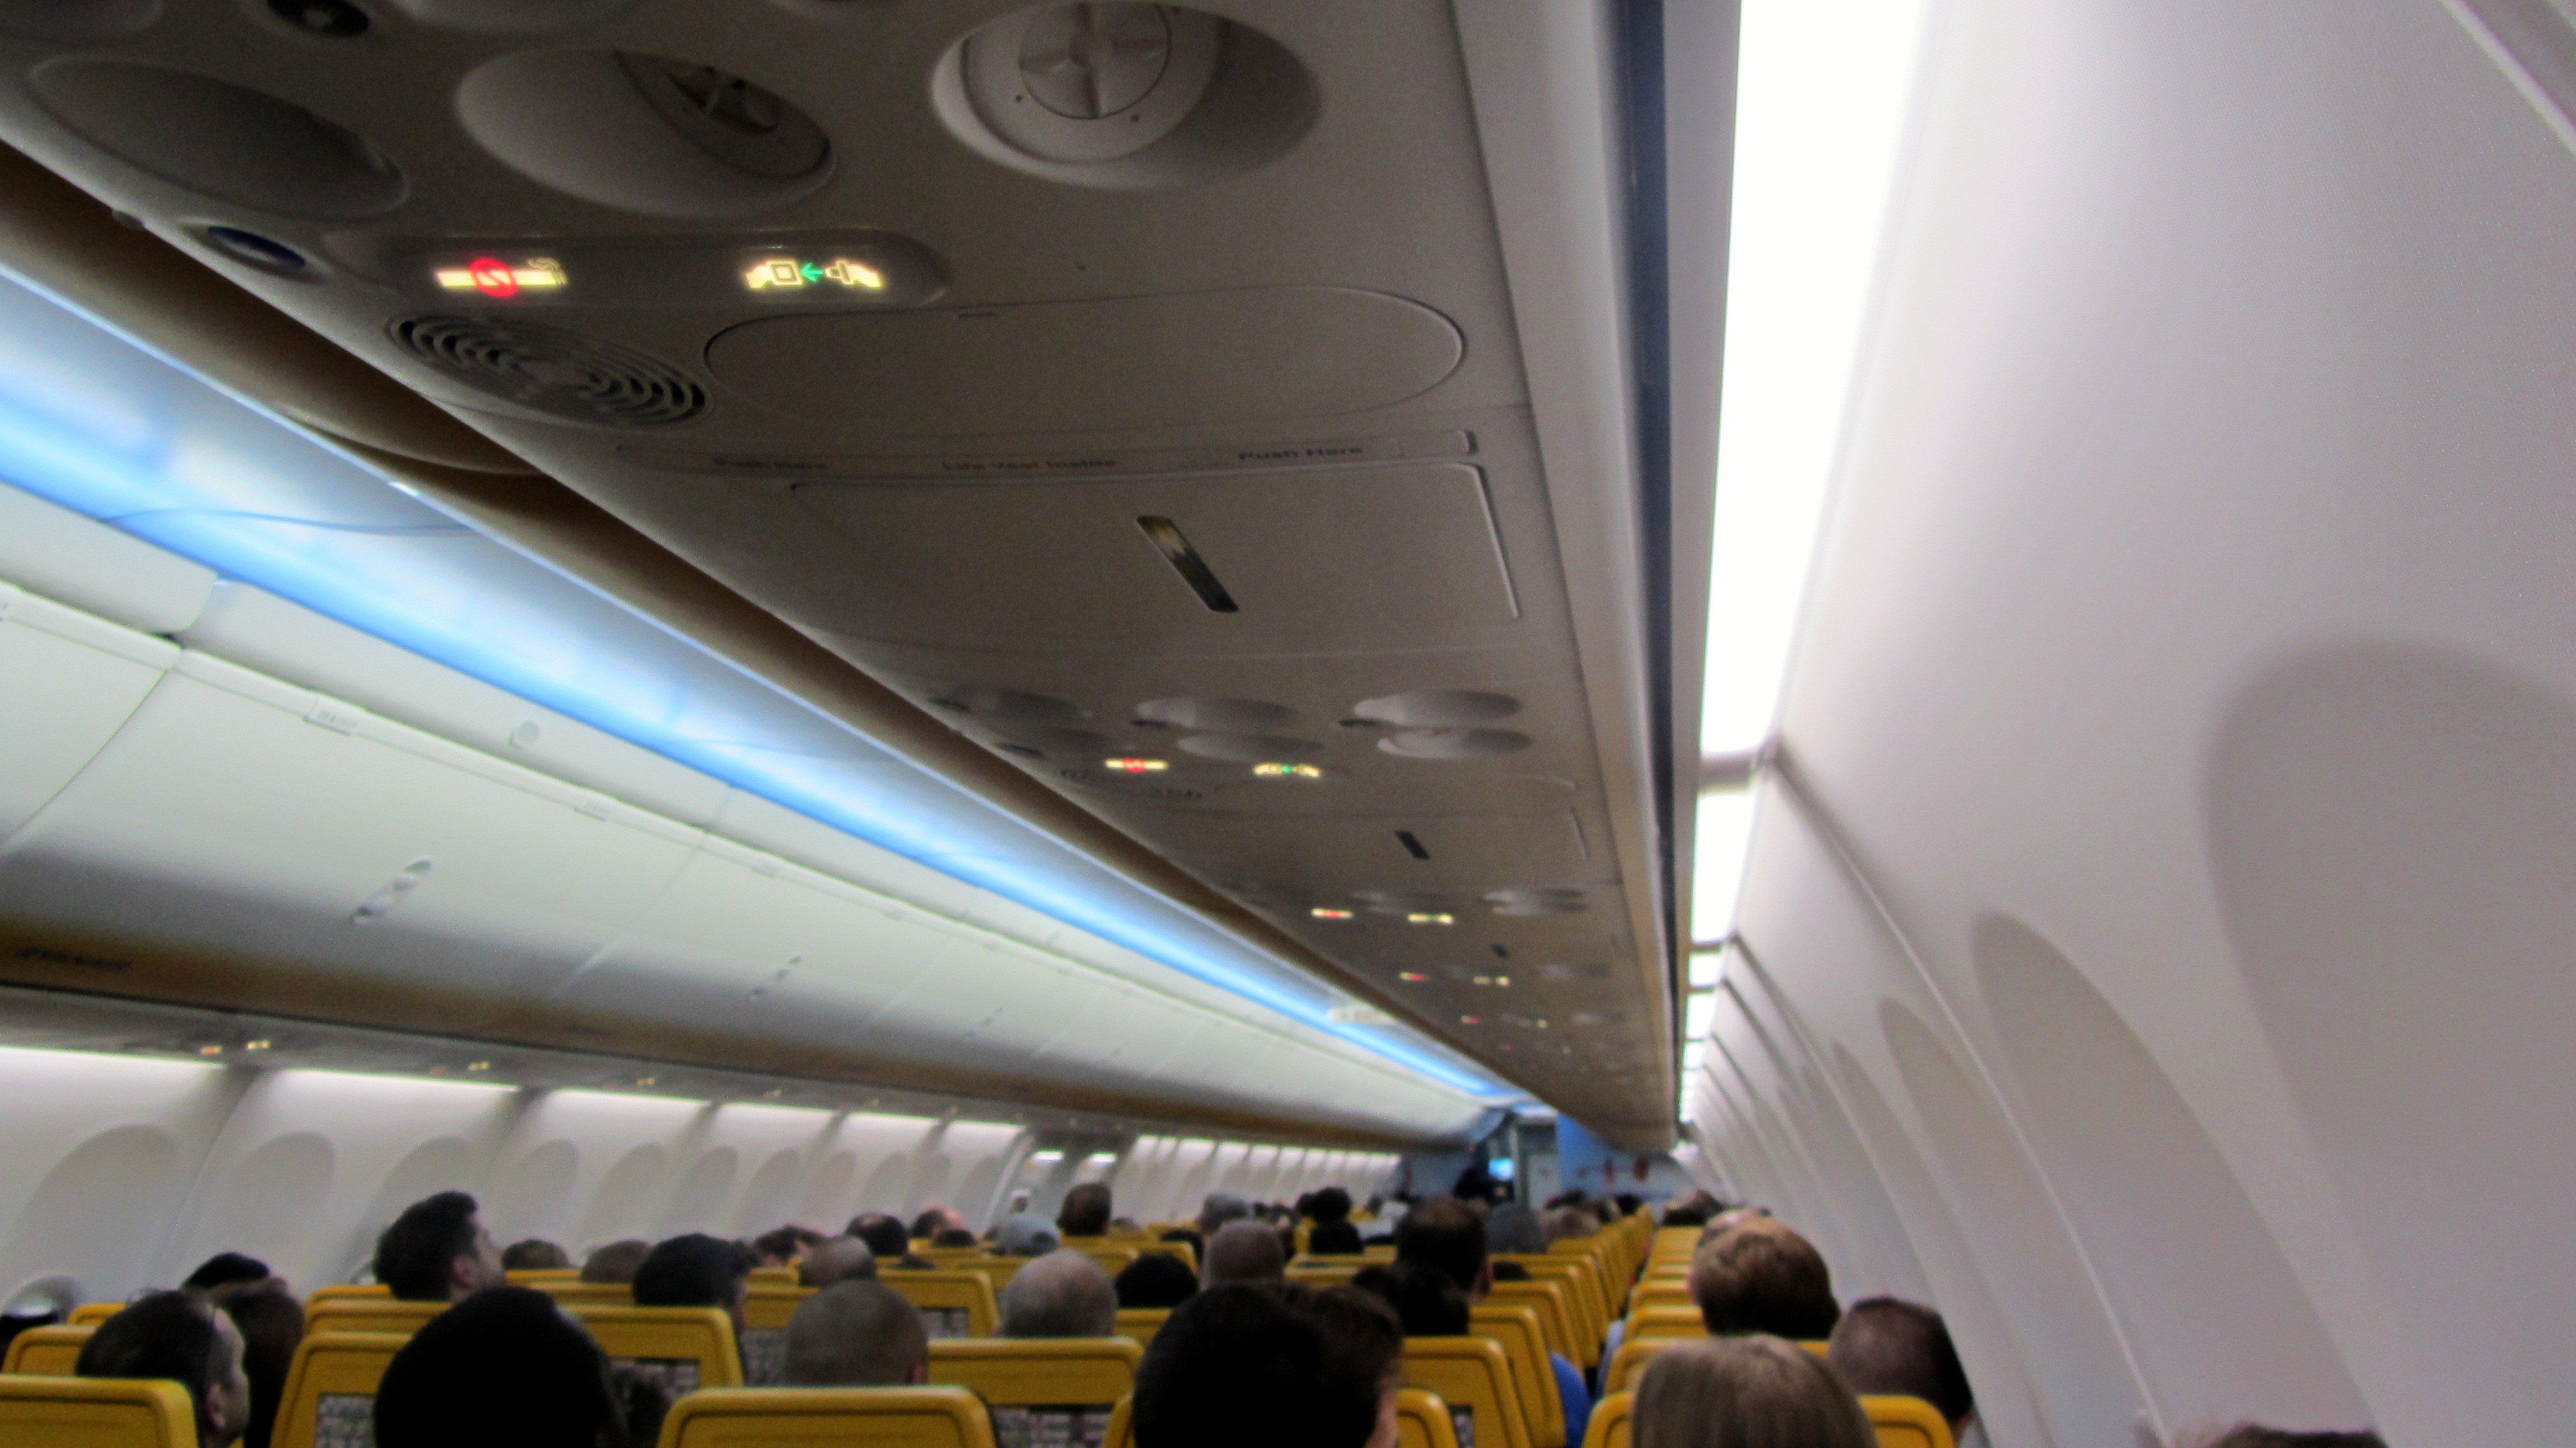 This recent Boeing has the Sky Interior, with the blue mood light at departure